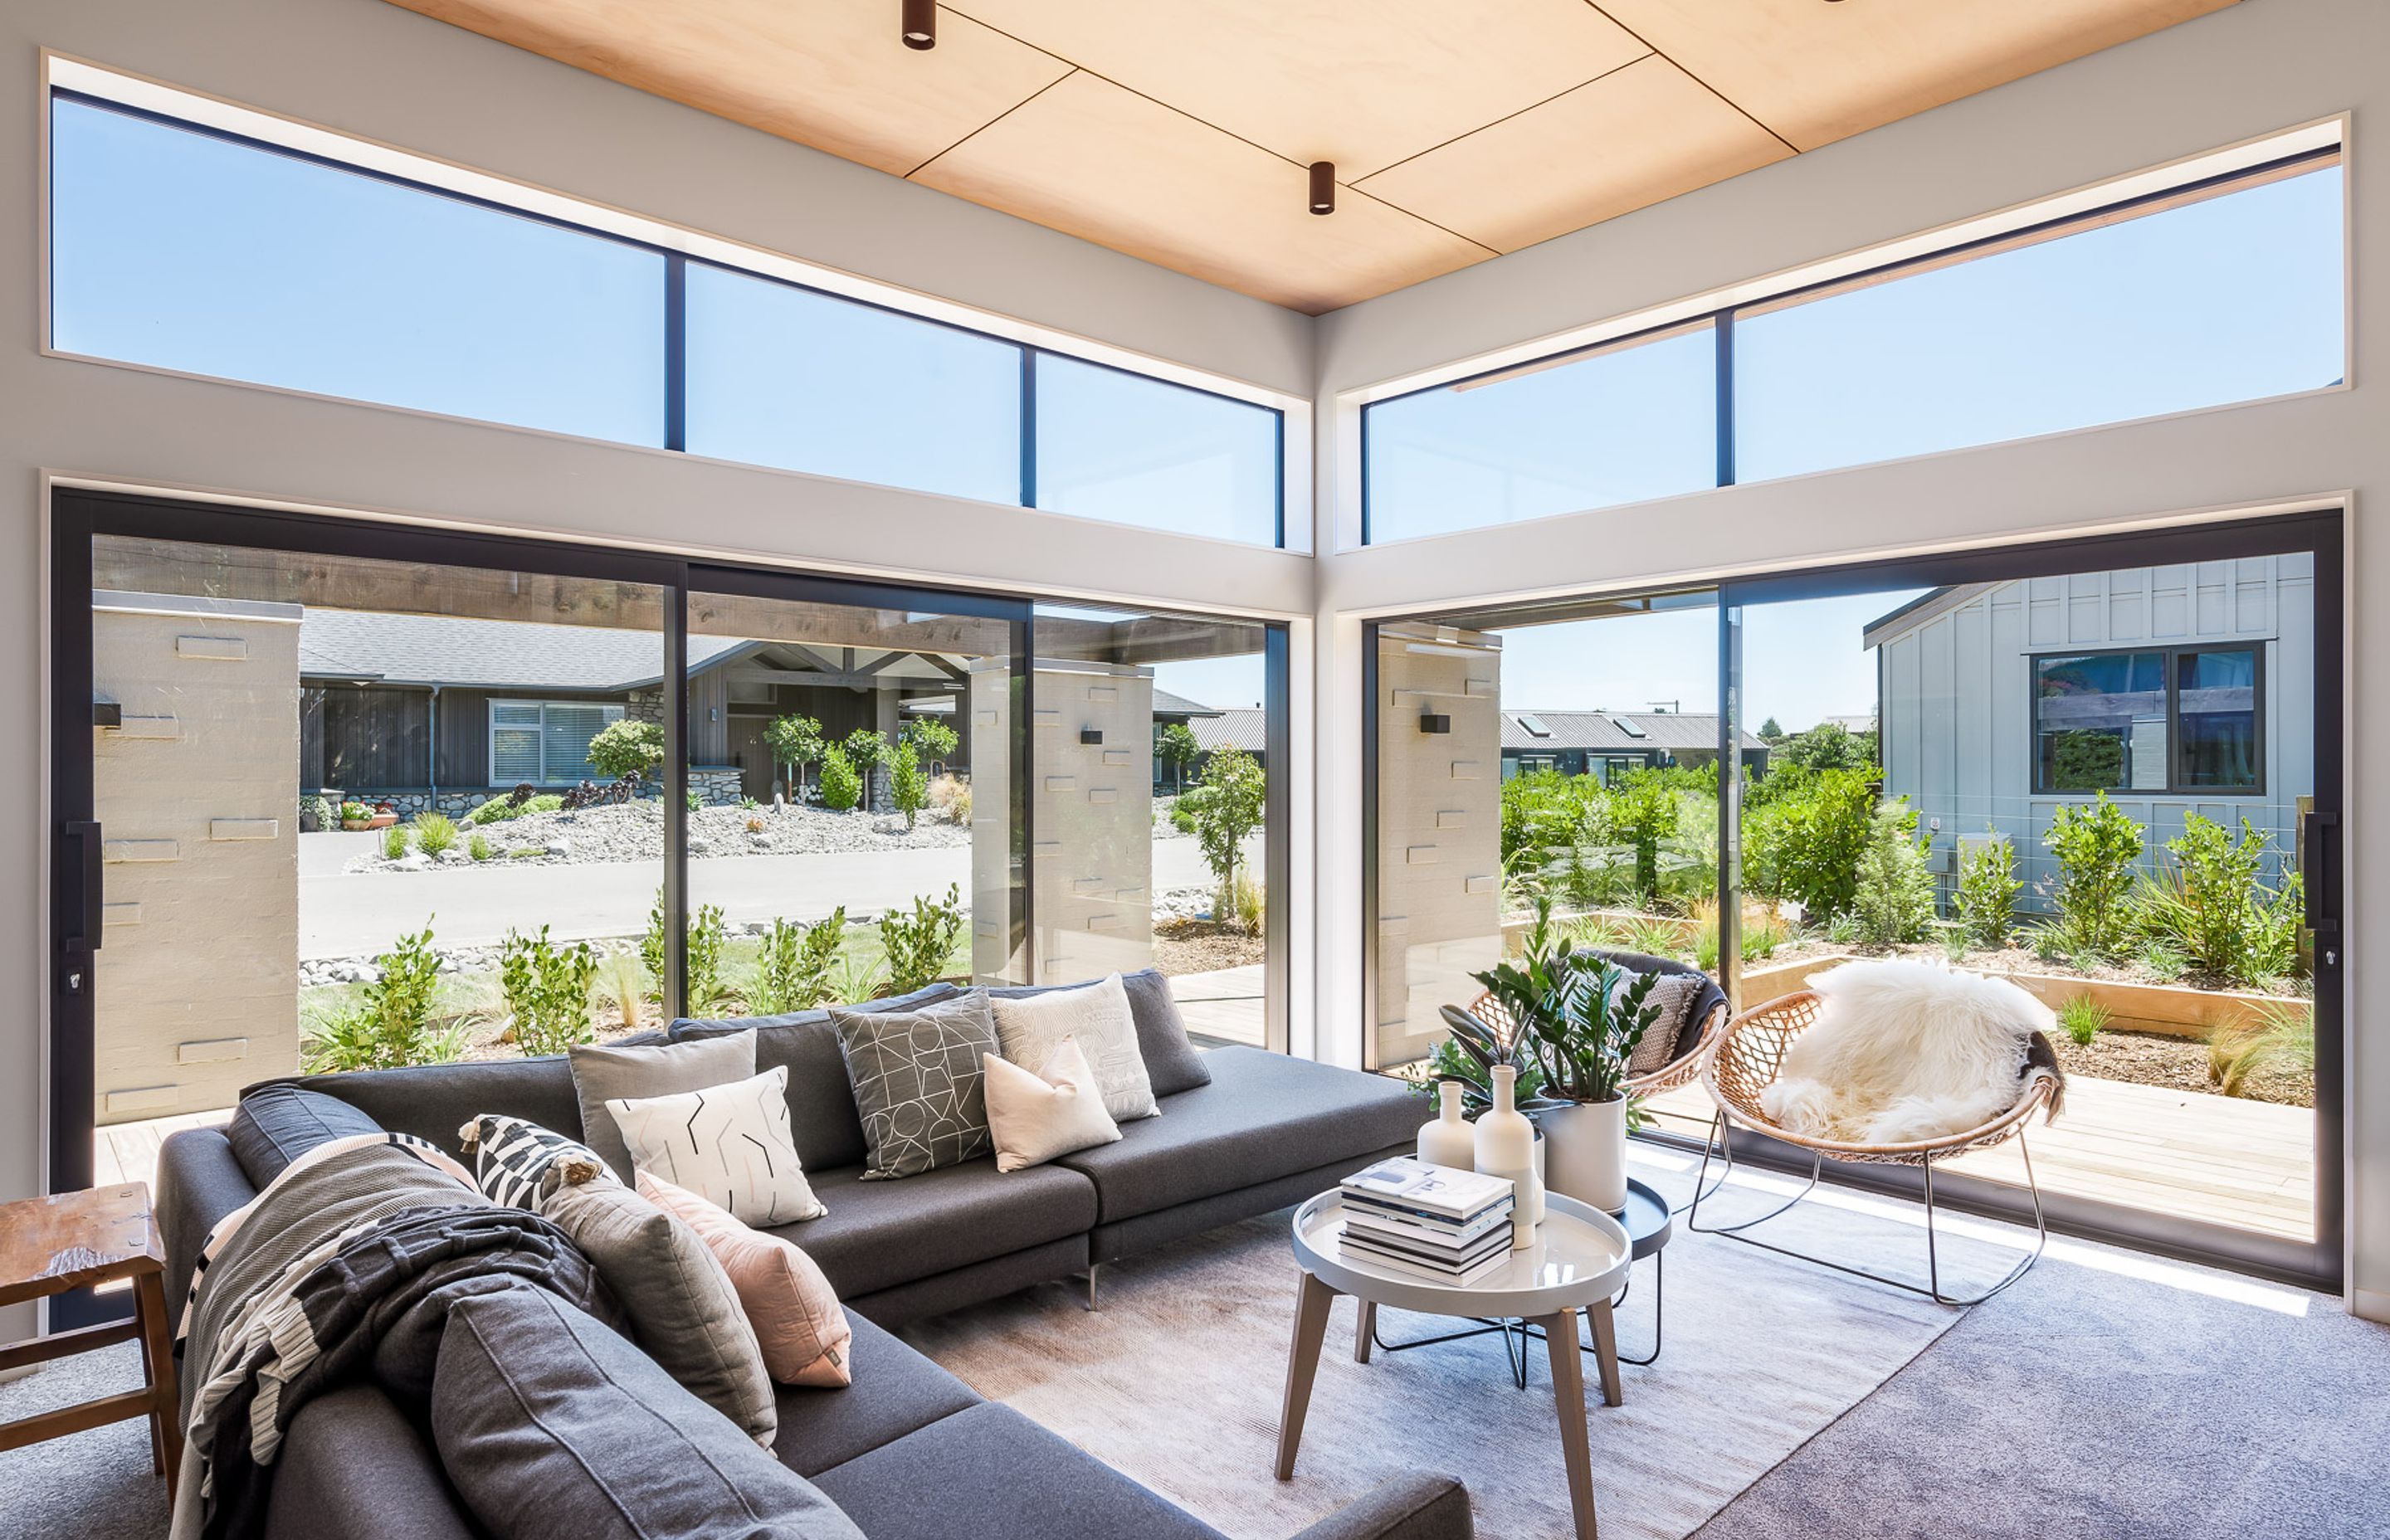 In the living area, the ceiling height reaches 3.6 metres and the clerestory windows help bring natural light into the interior as well as directing sightlines up and over the neighbouring property.